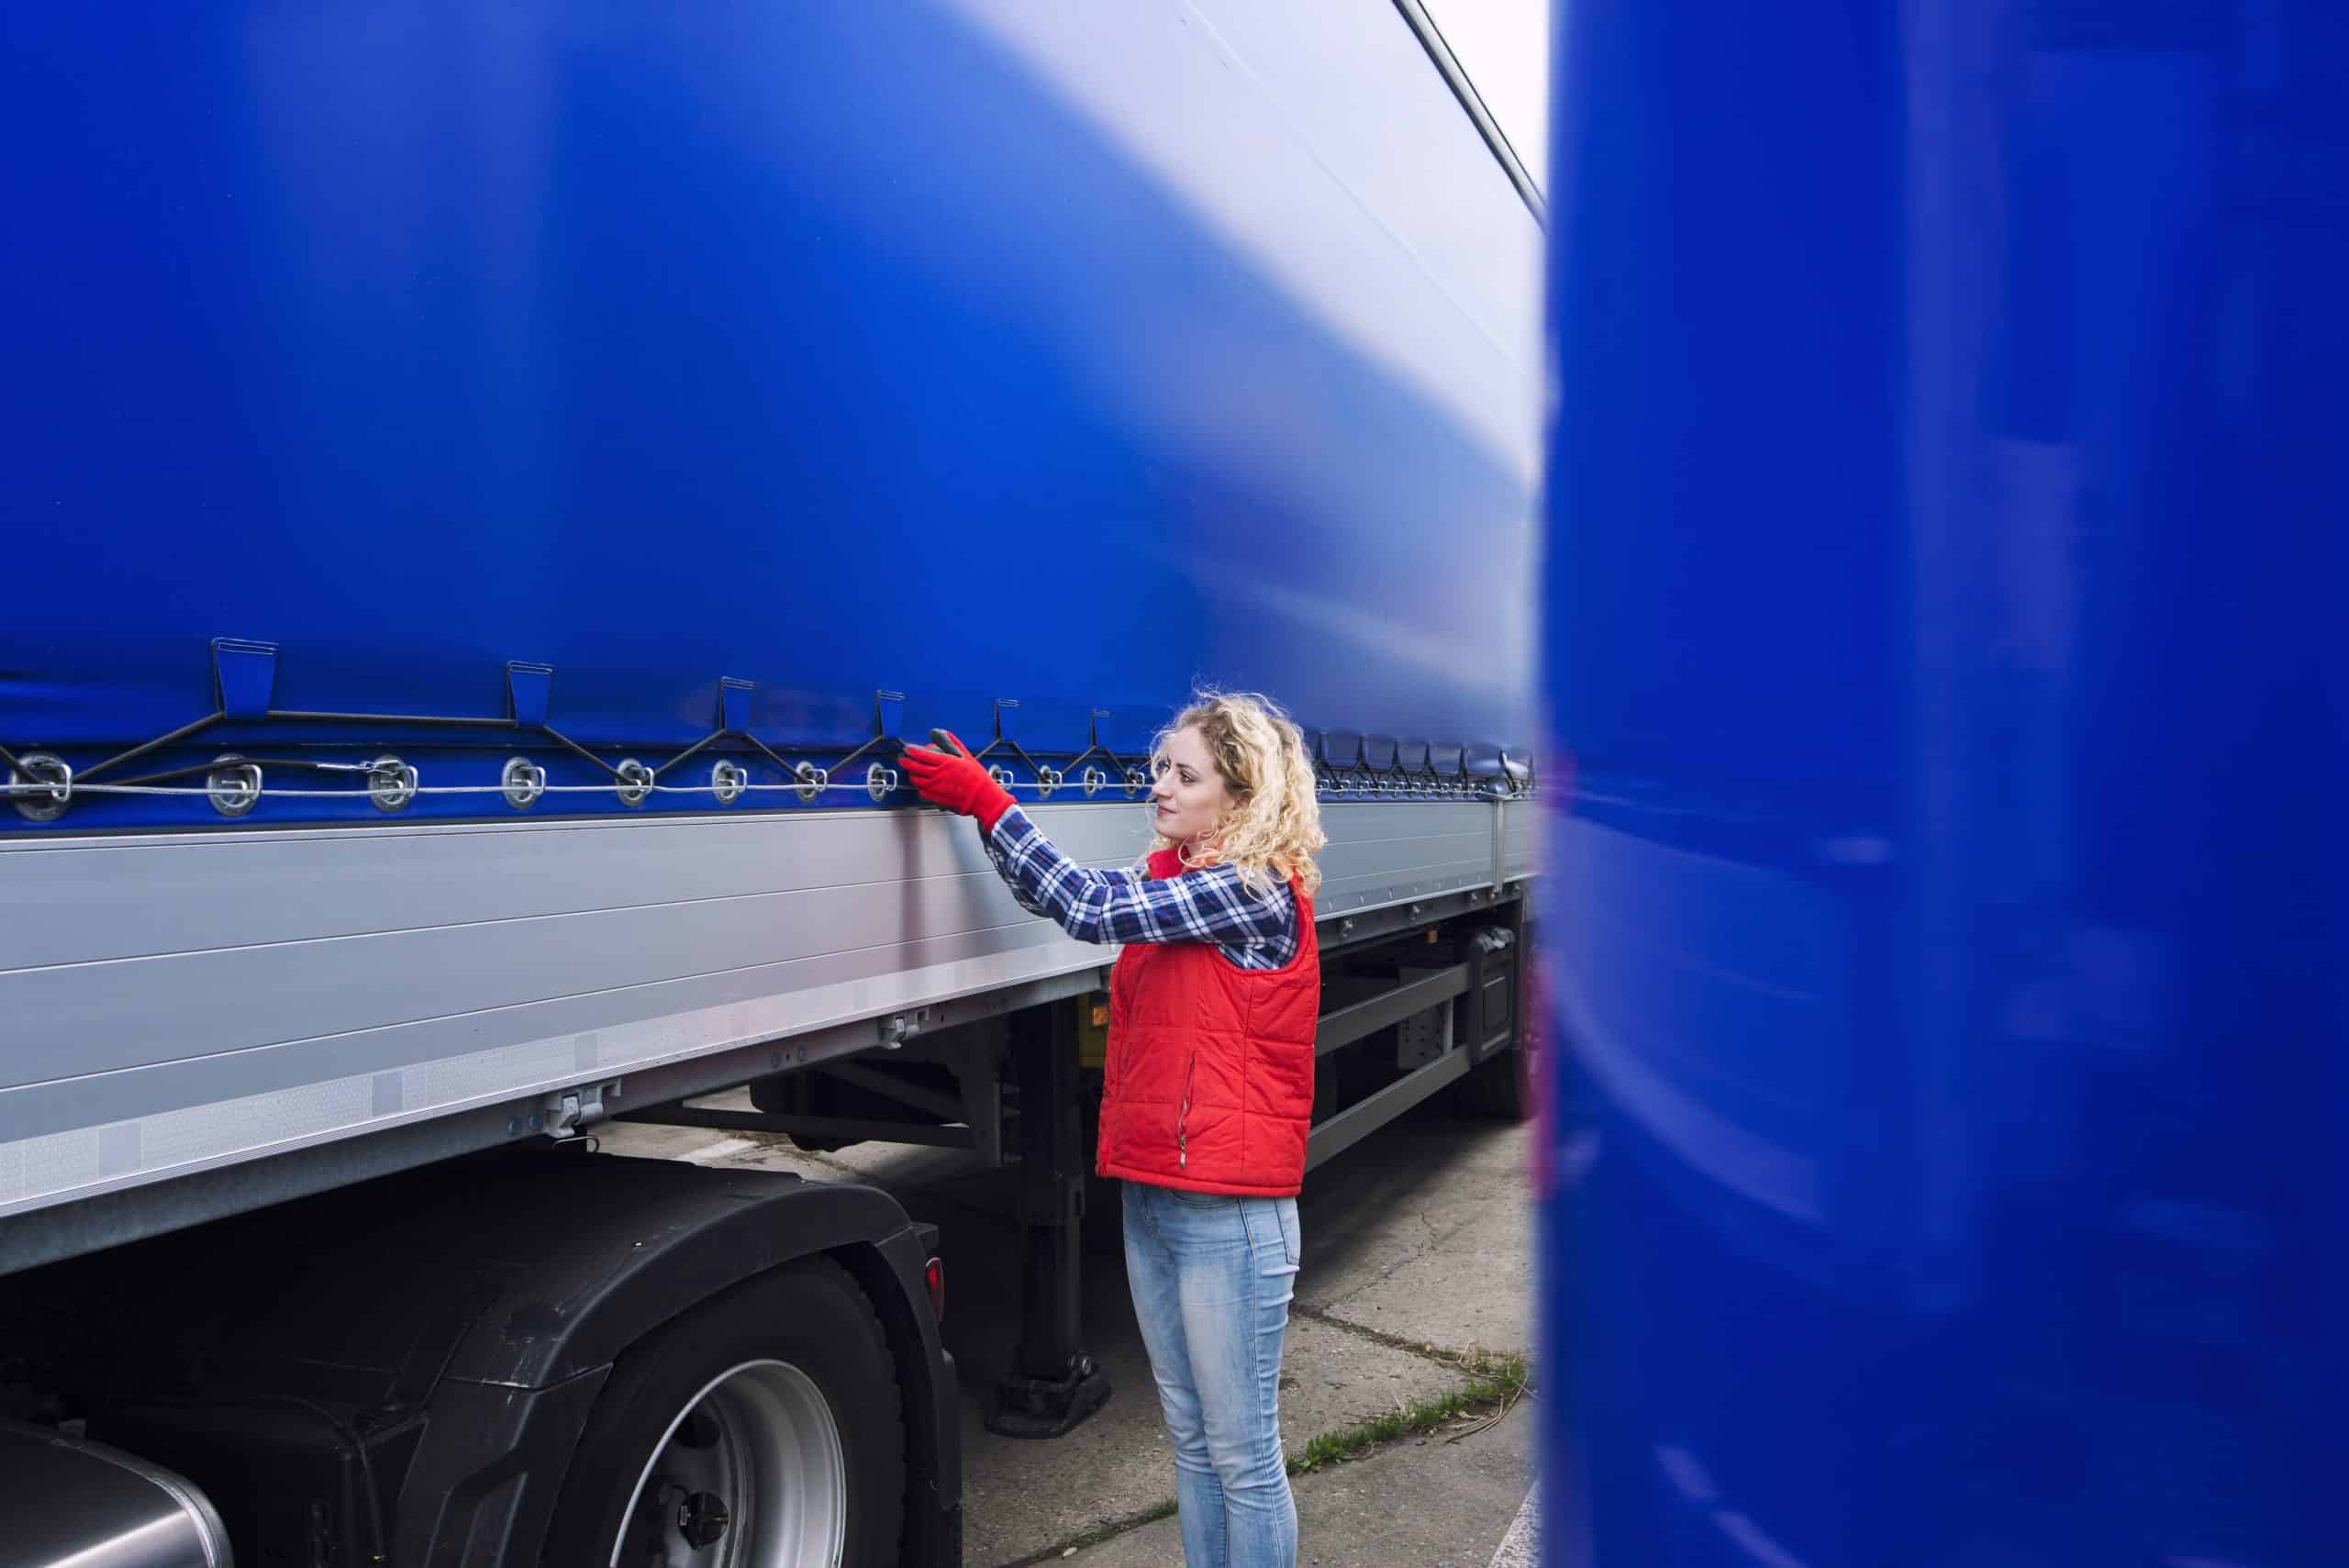 Common challenges faced by truck drivers in maintaining cleanliness